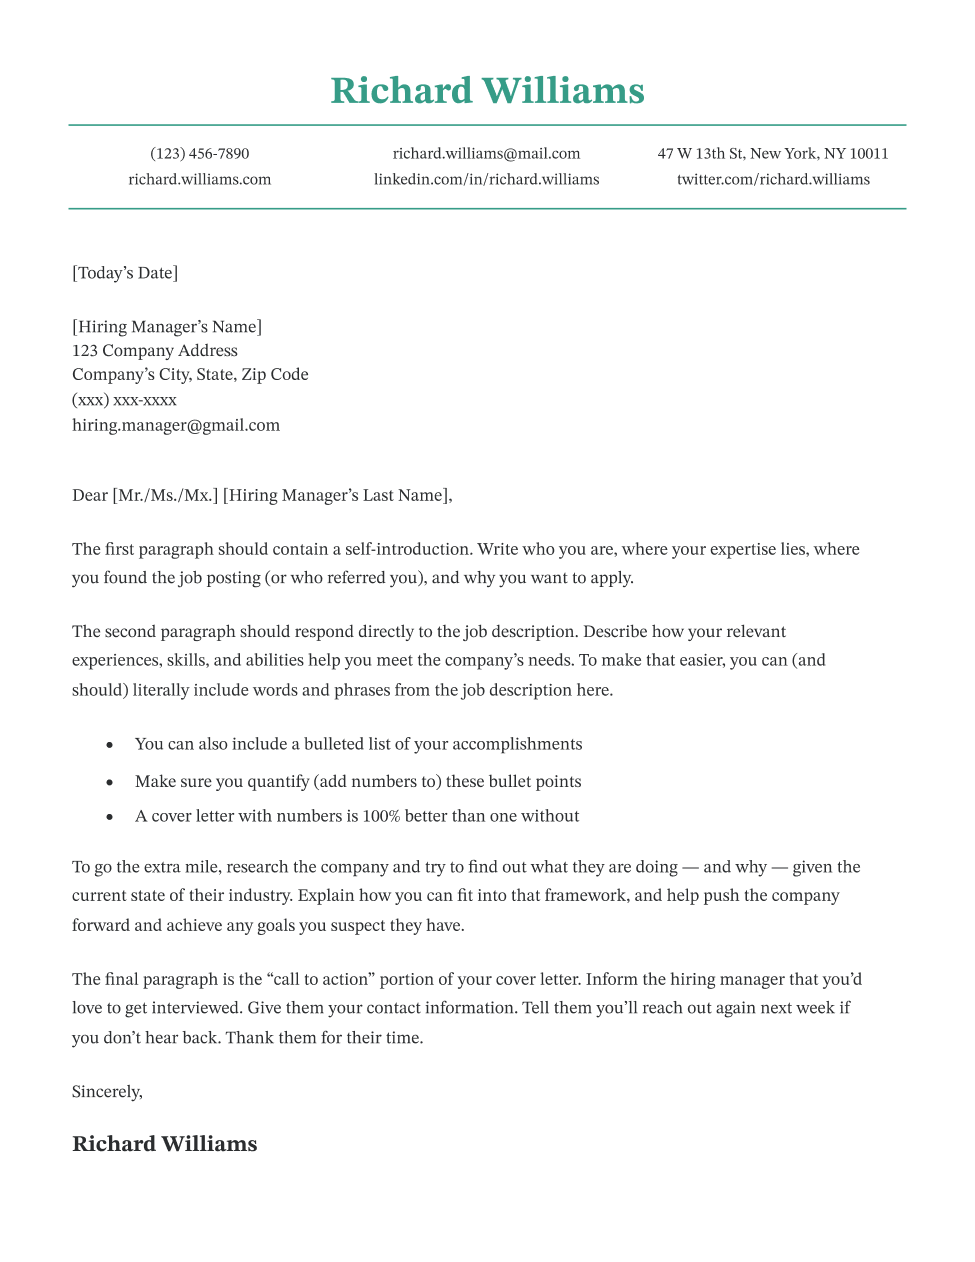 Chicago cover letter template in green, with a basic design that's highly formal.